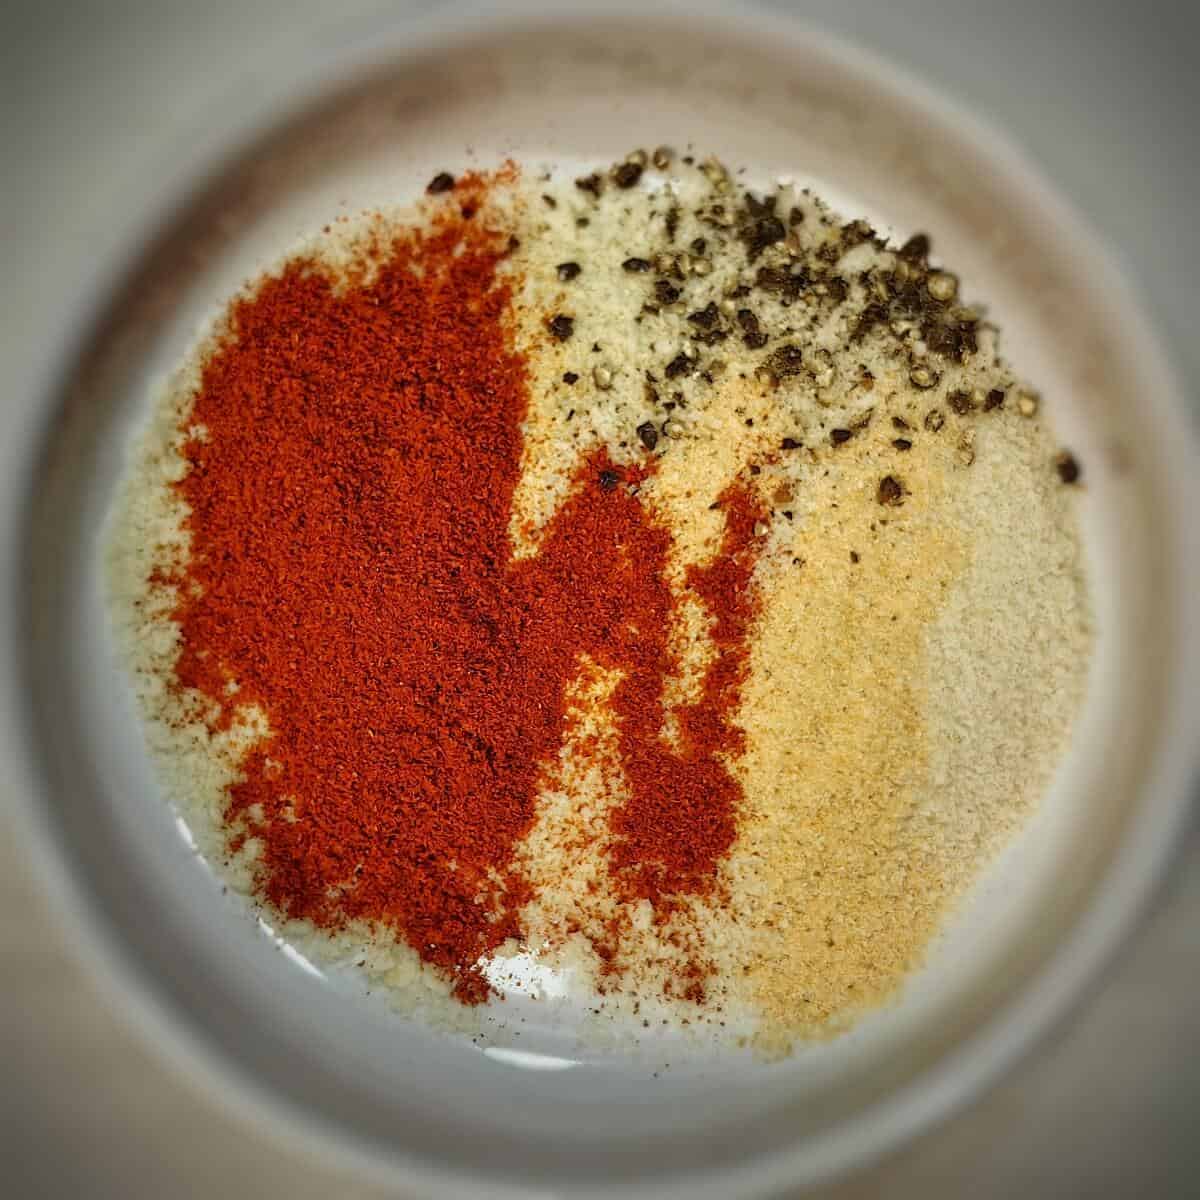 spices and seasoning mixture